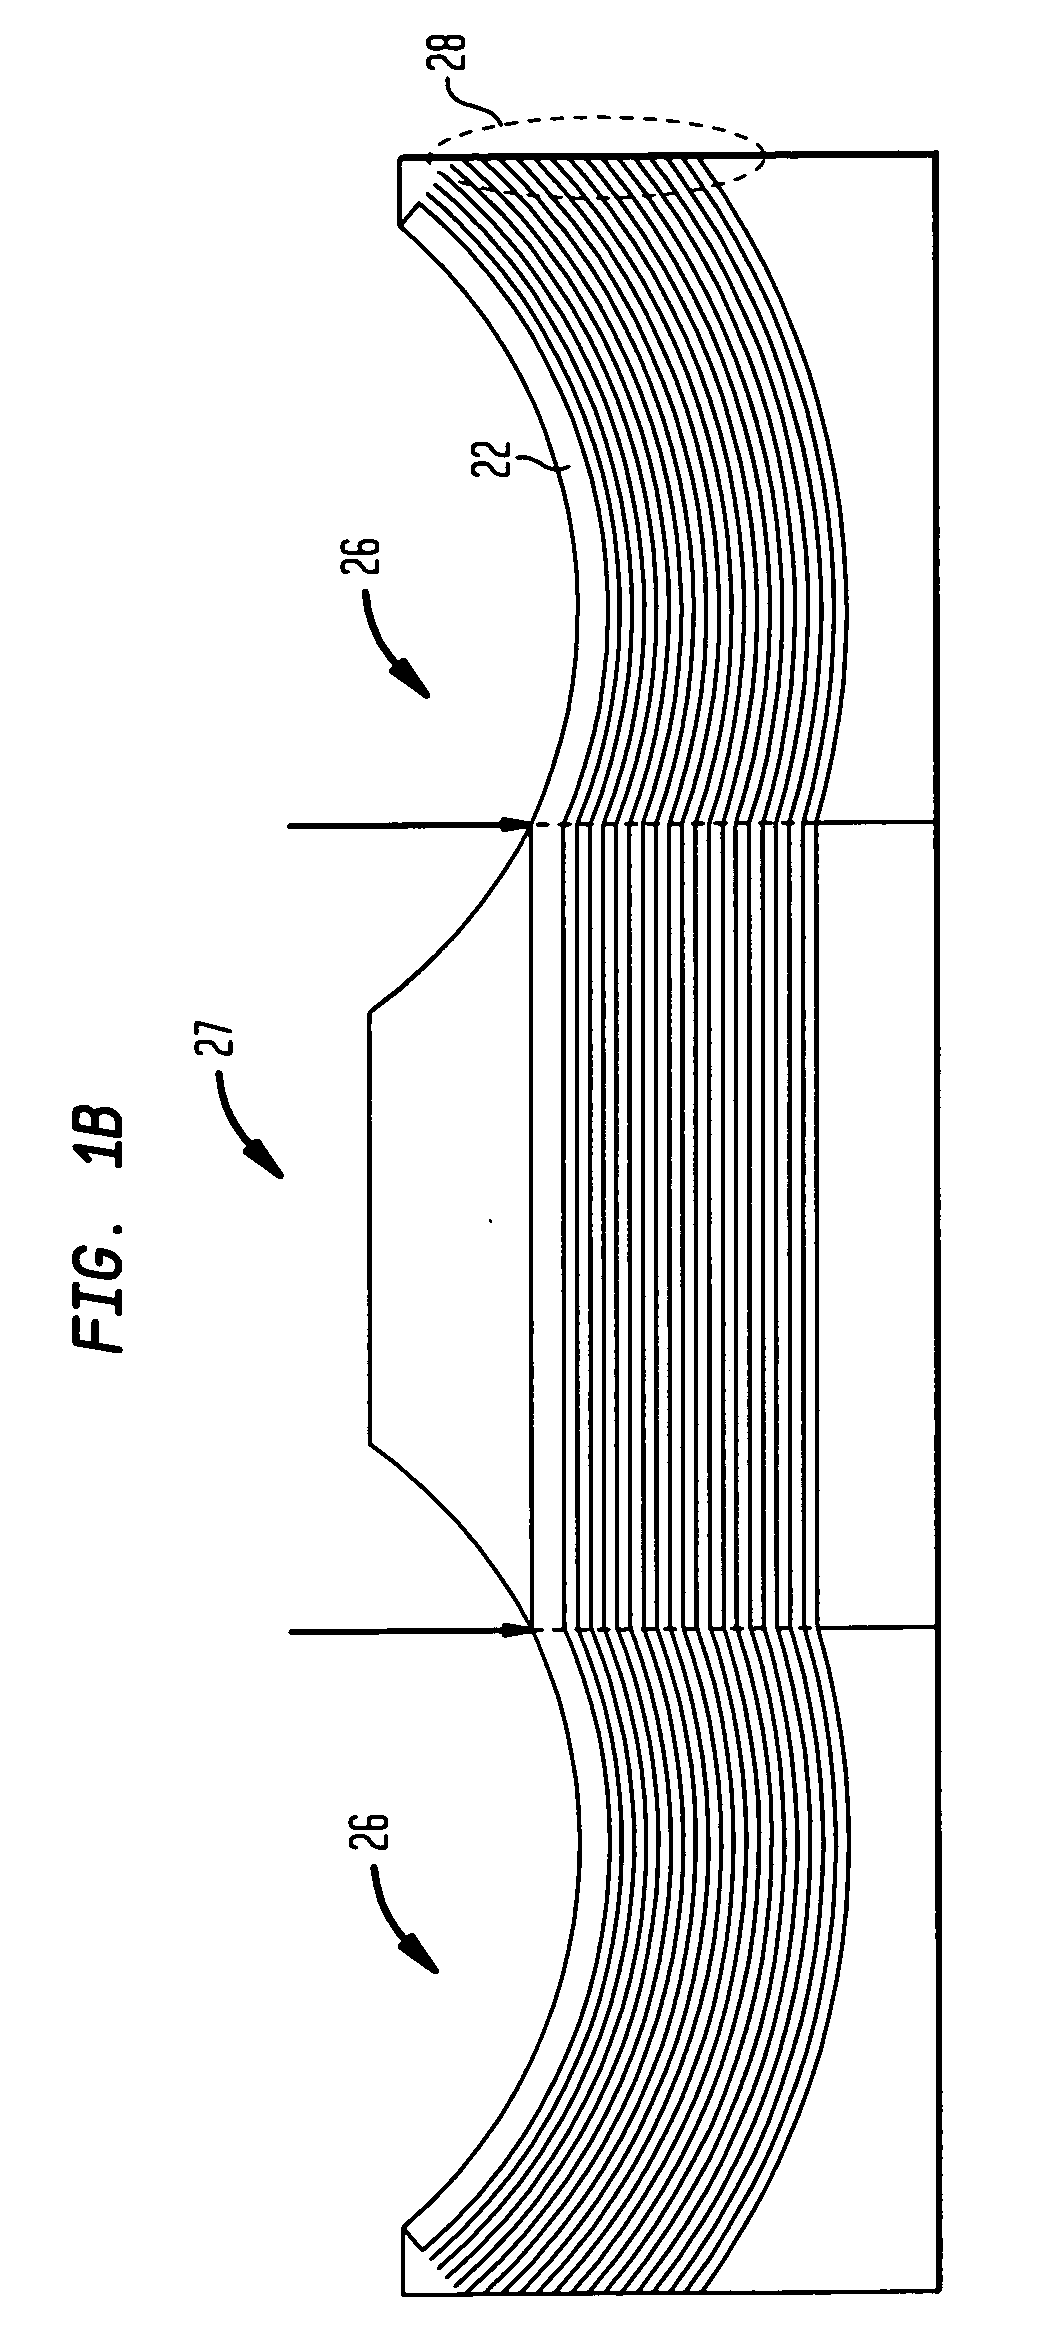 Garments having a curable polymer thereon and a system and method for its manufacture